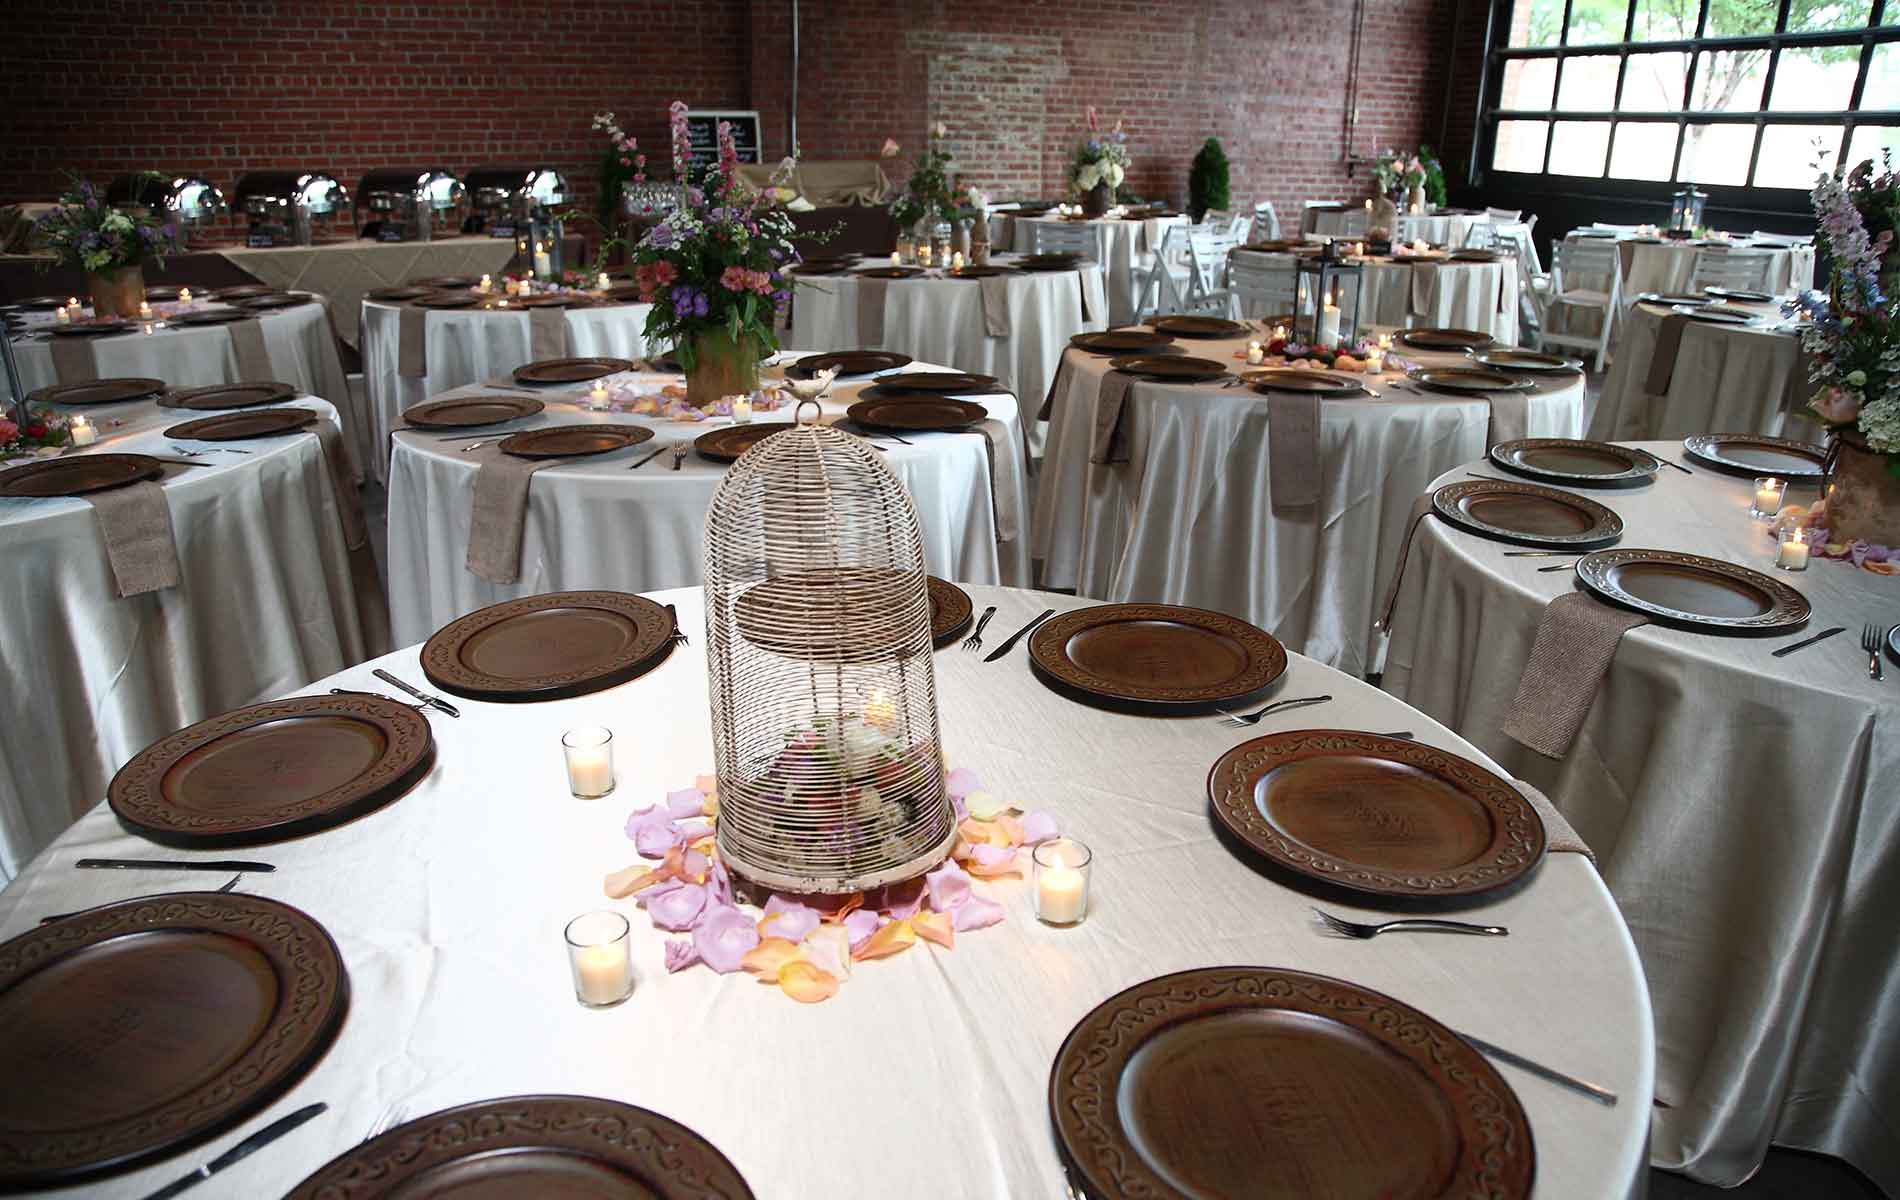 See pictures and photos of The Social Wedding Venue and Event Facility in Johnson City, TN.